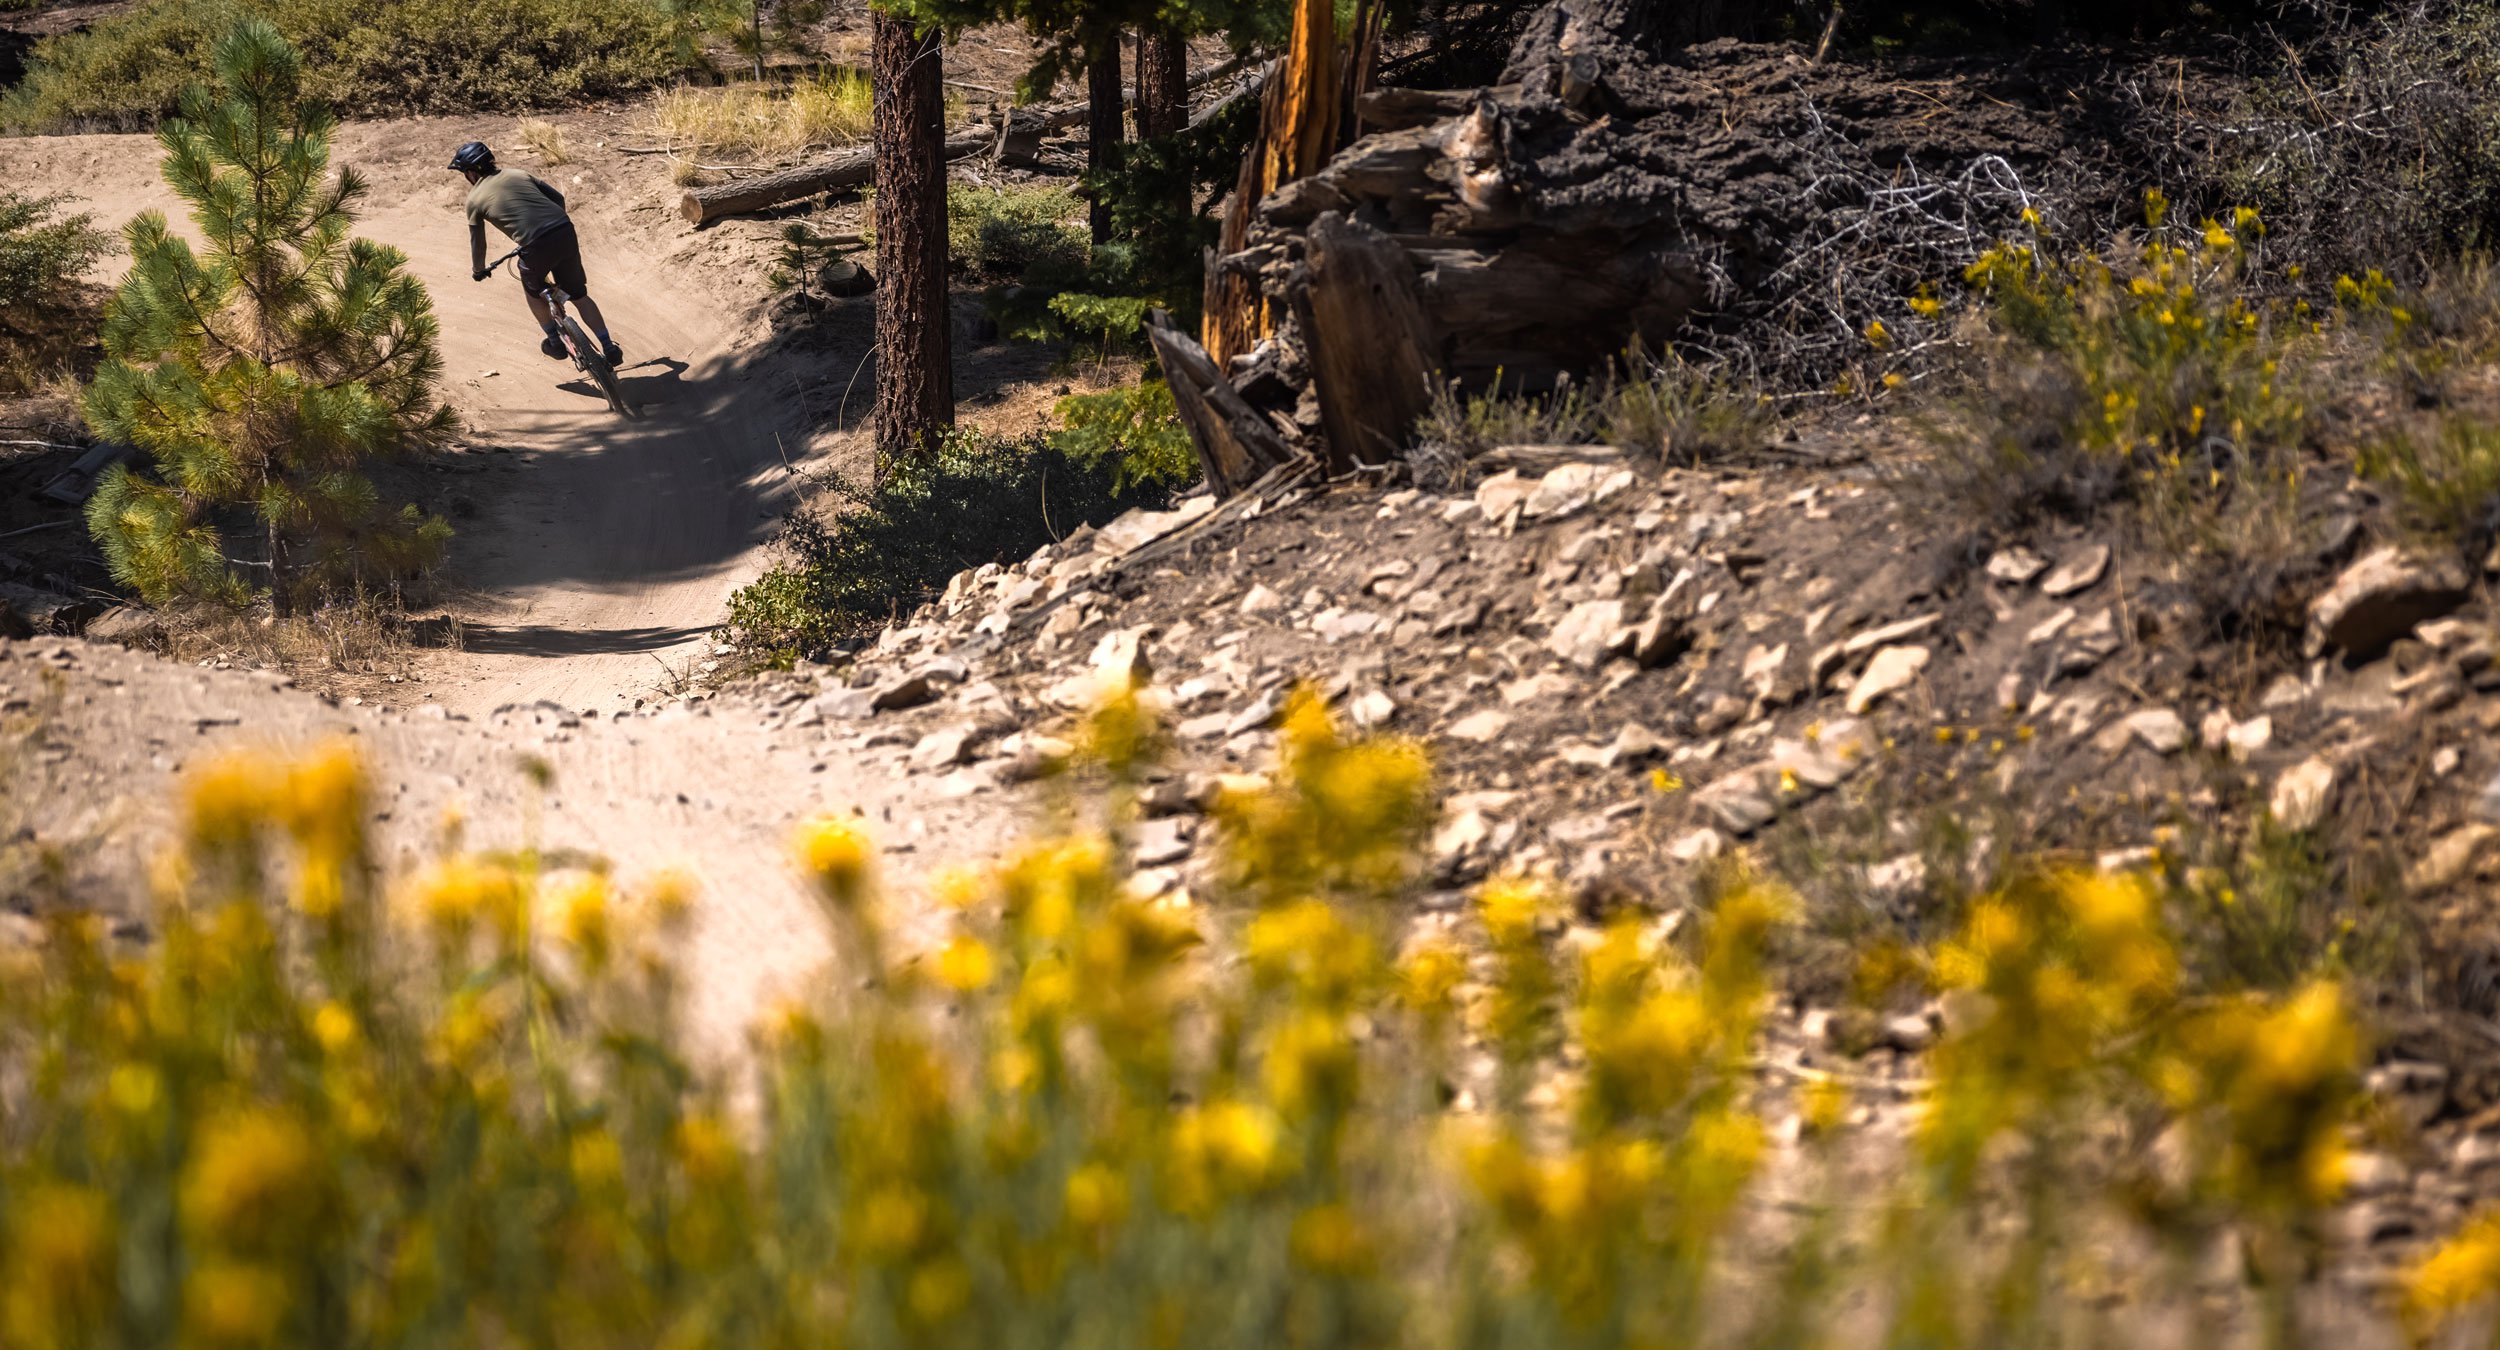 Mountain biker riding on a dirt trail with yellow flowers